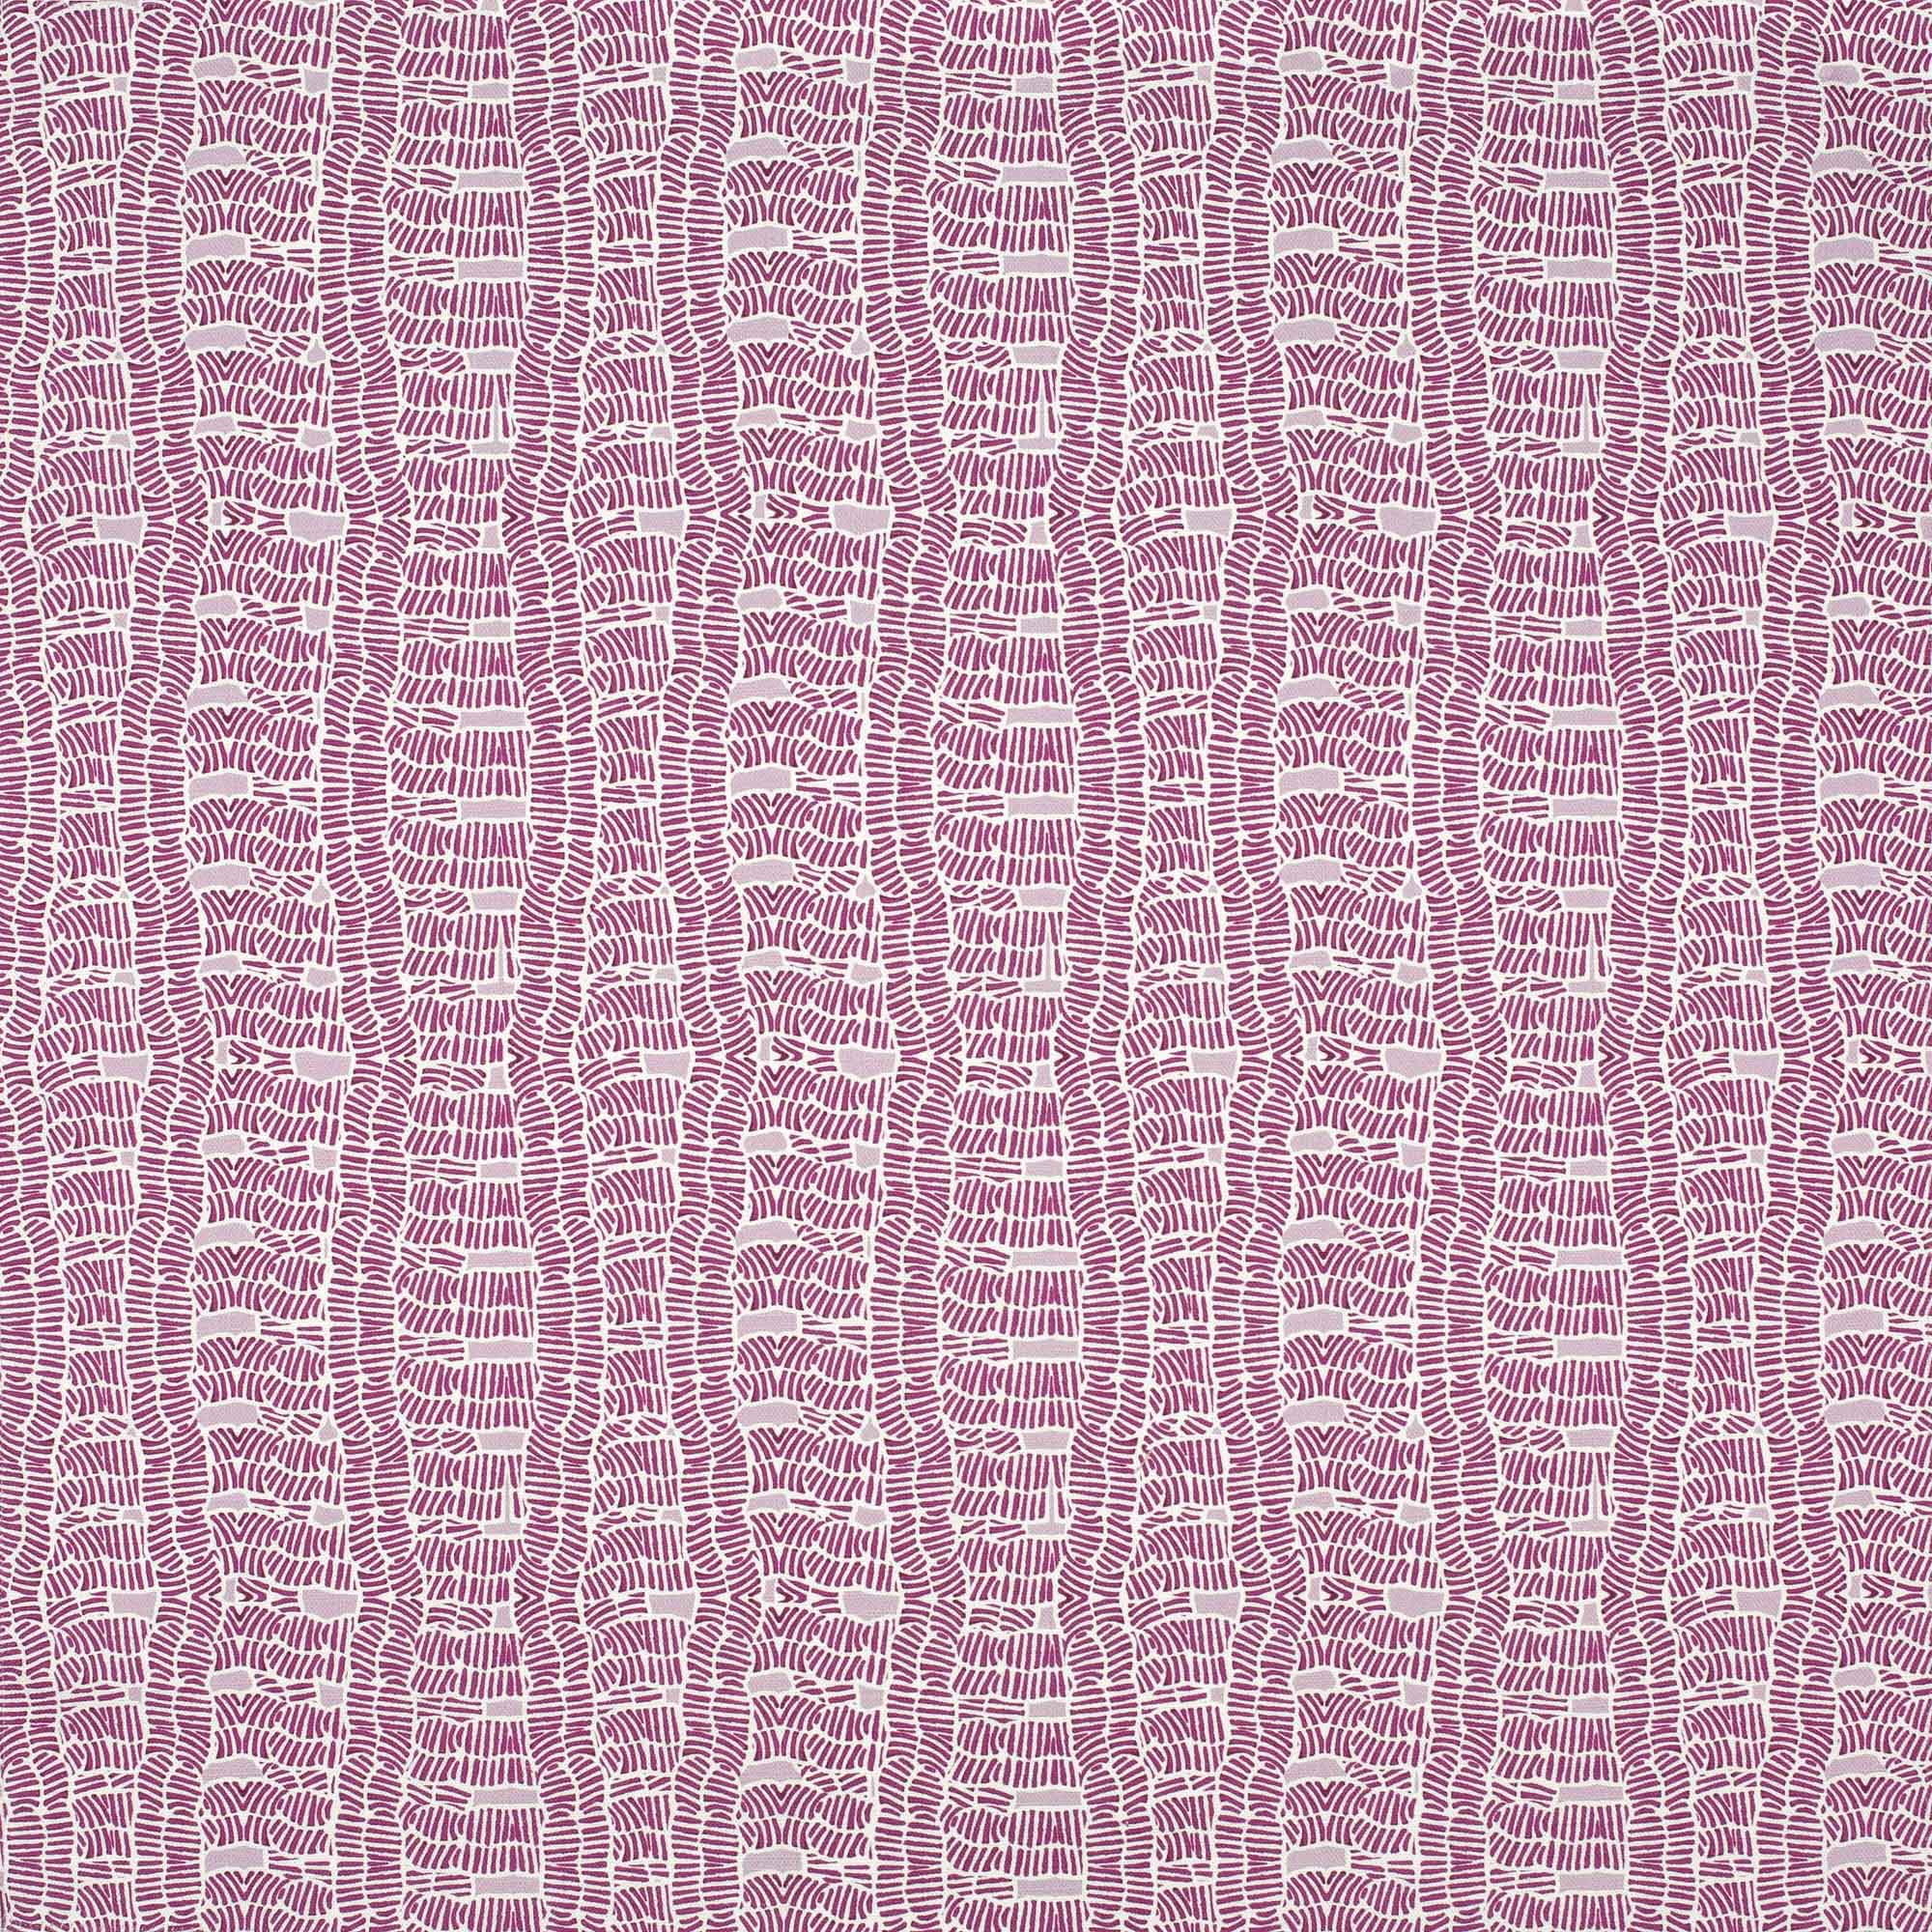 Detail of fabric in a playful curvy grid print in purple on a white field.